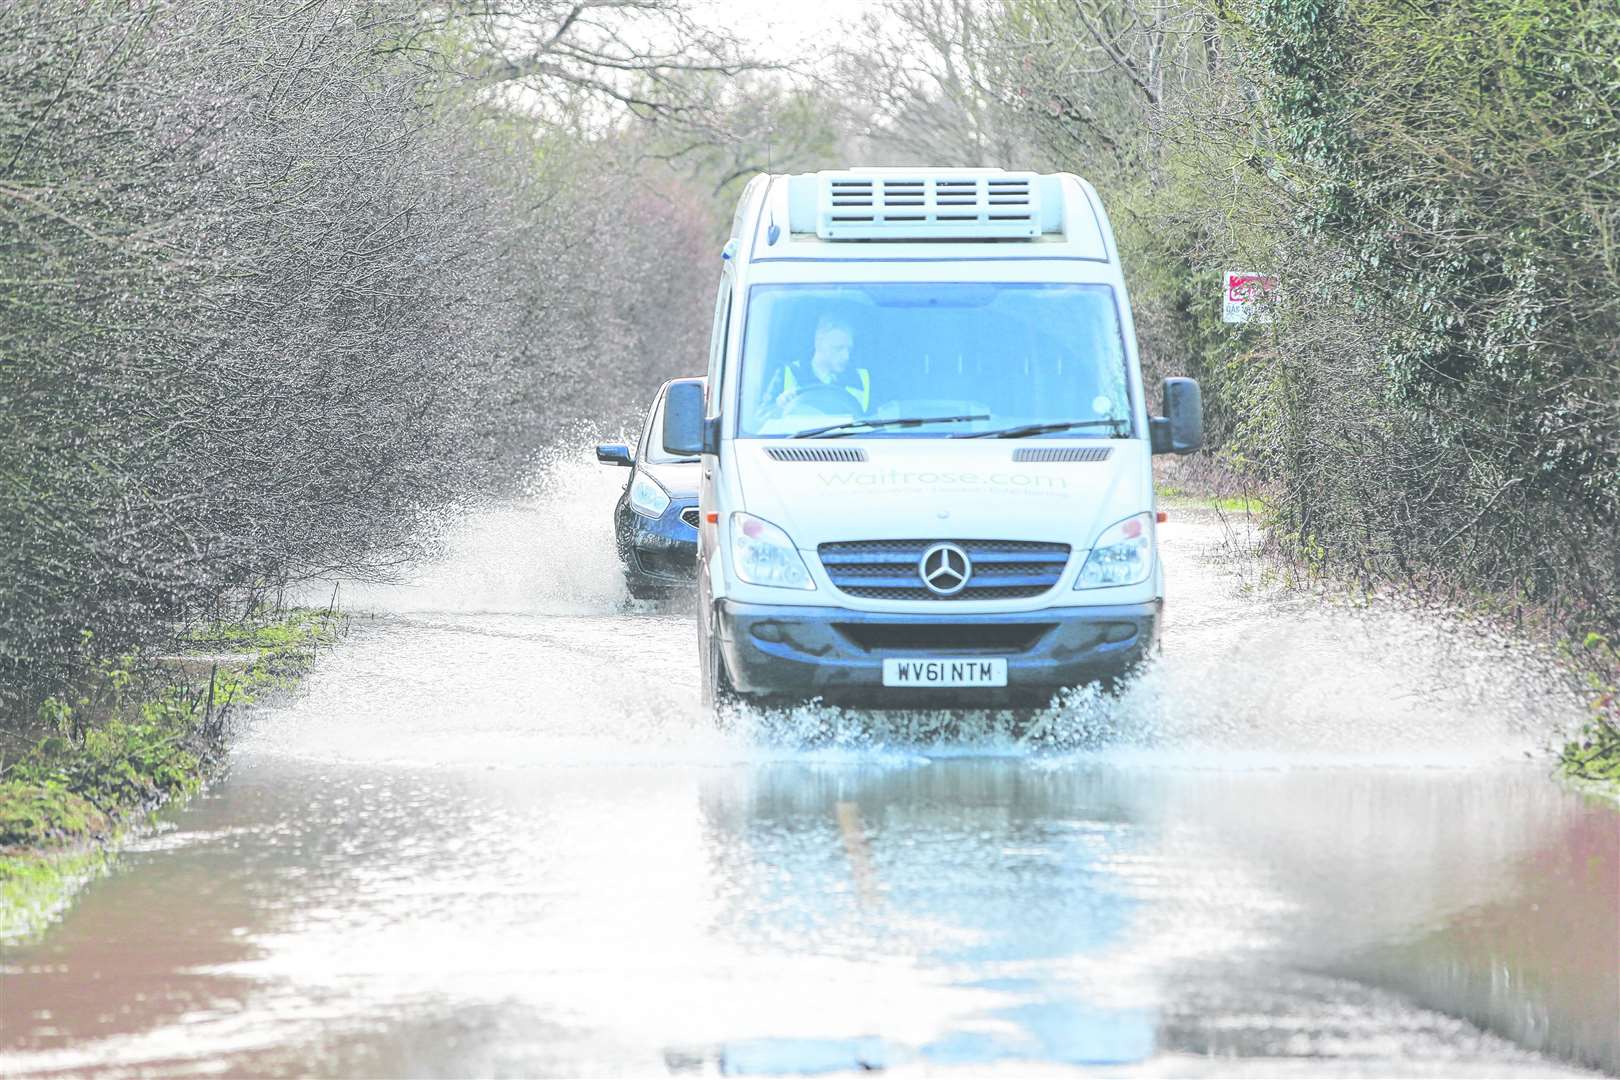 Flooding on New Barn Road in Sutton Valence